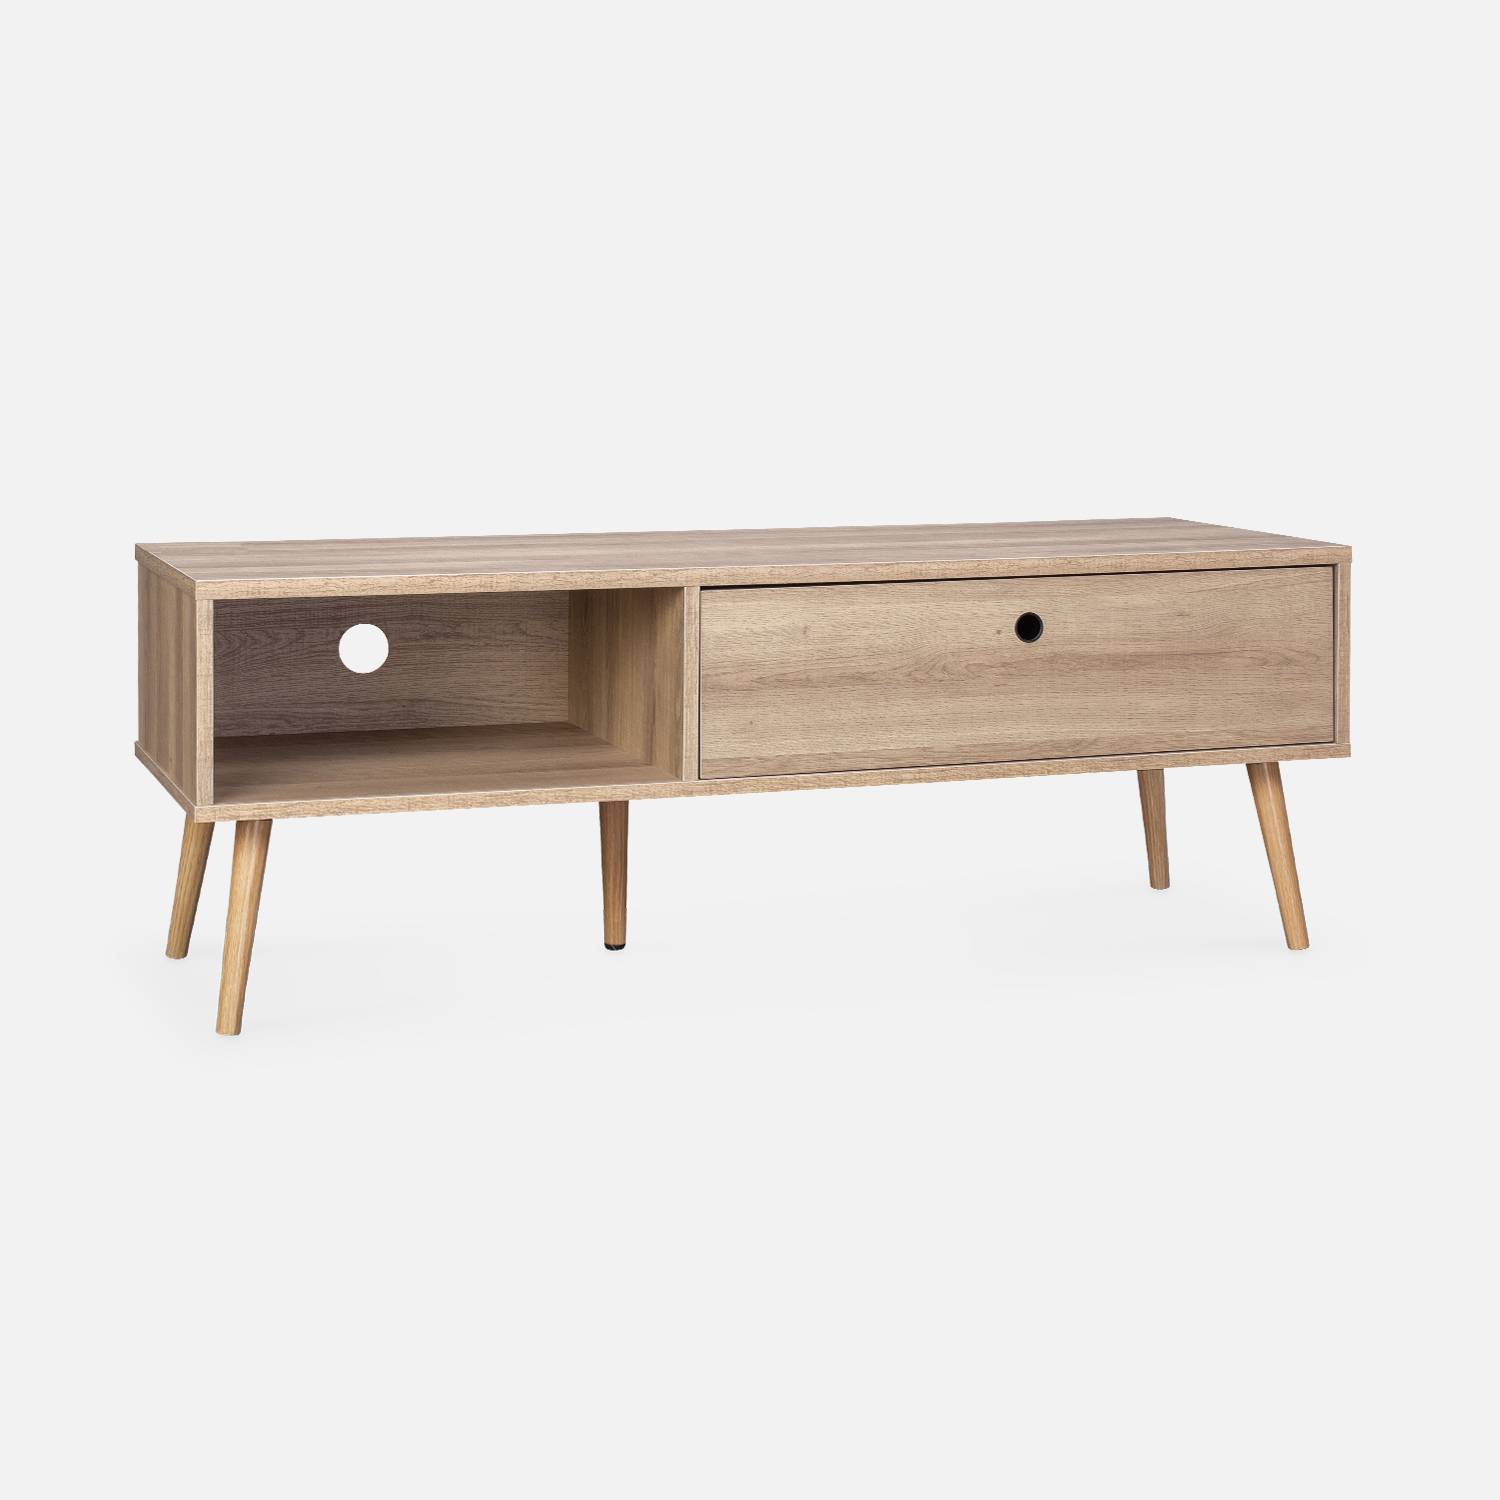 Scandinavian-style wood-effect TV stand with two storage spaces, 120x39x43cm - Scandi - Natural,sweeek,Photo3